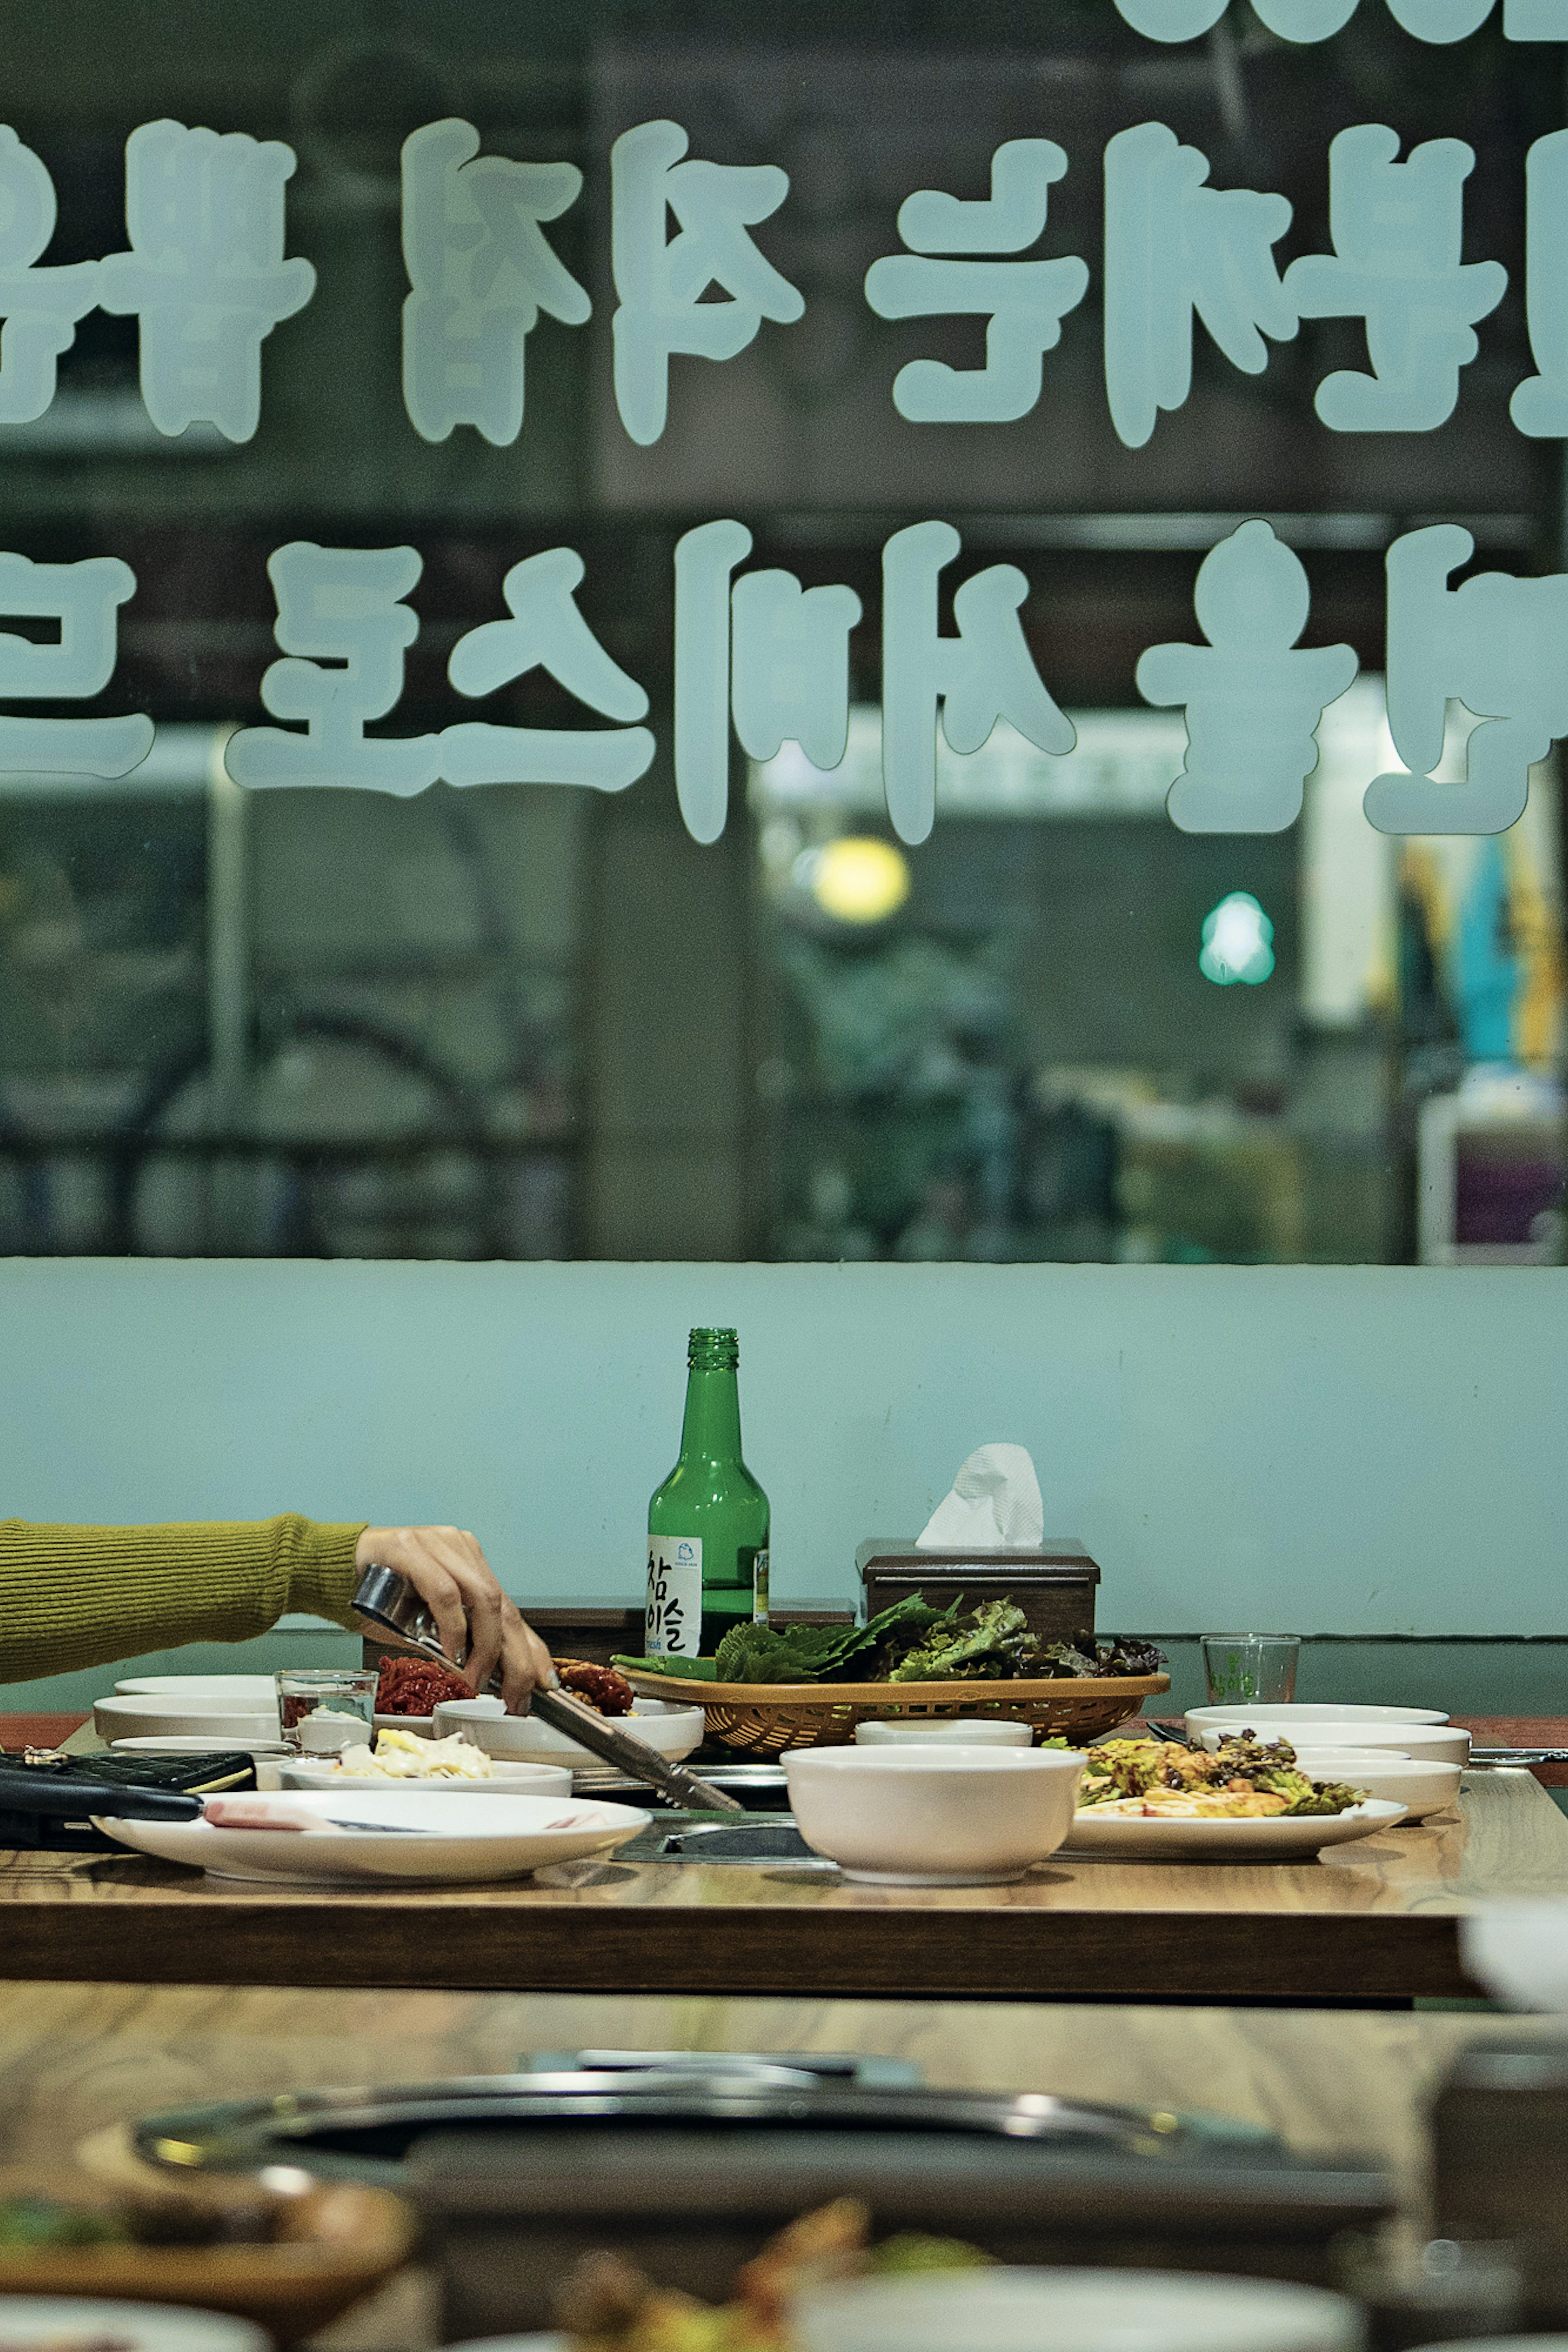 Teaser Image for Movie The Apartment with Two Women